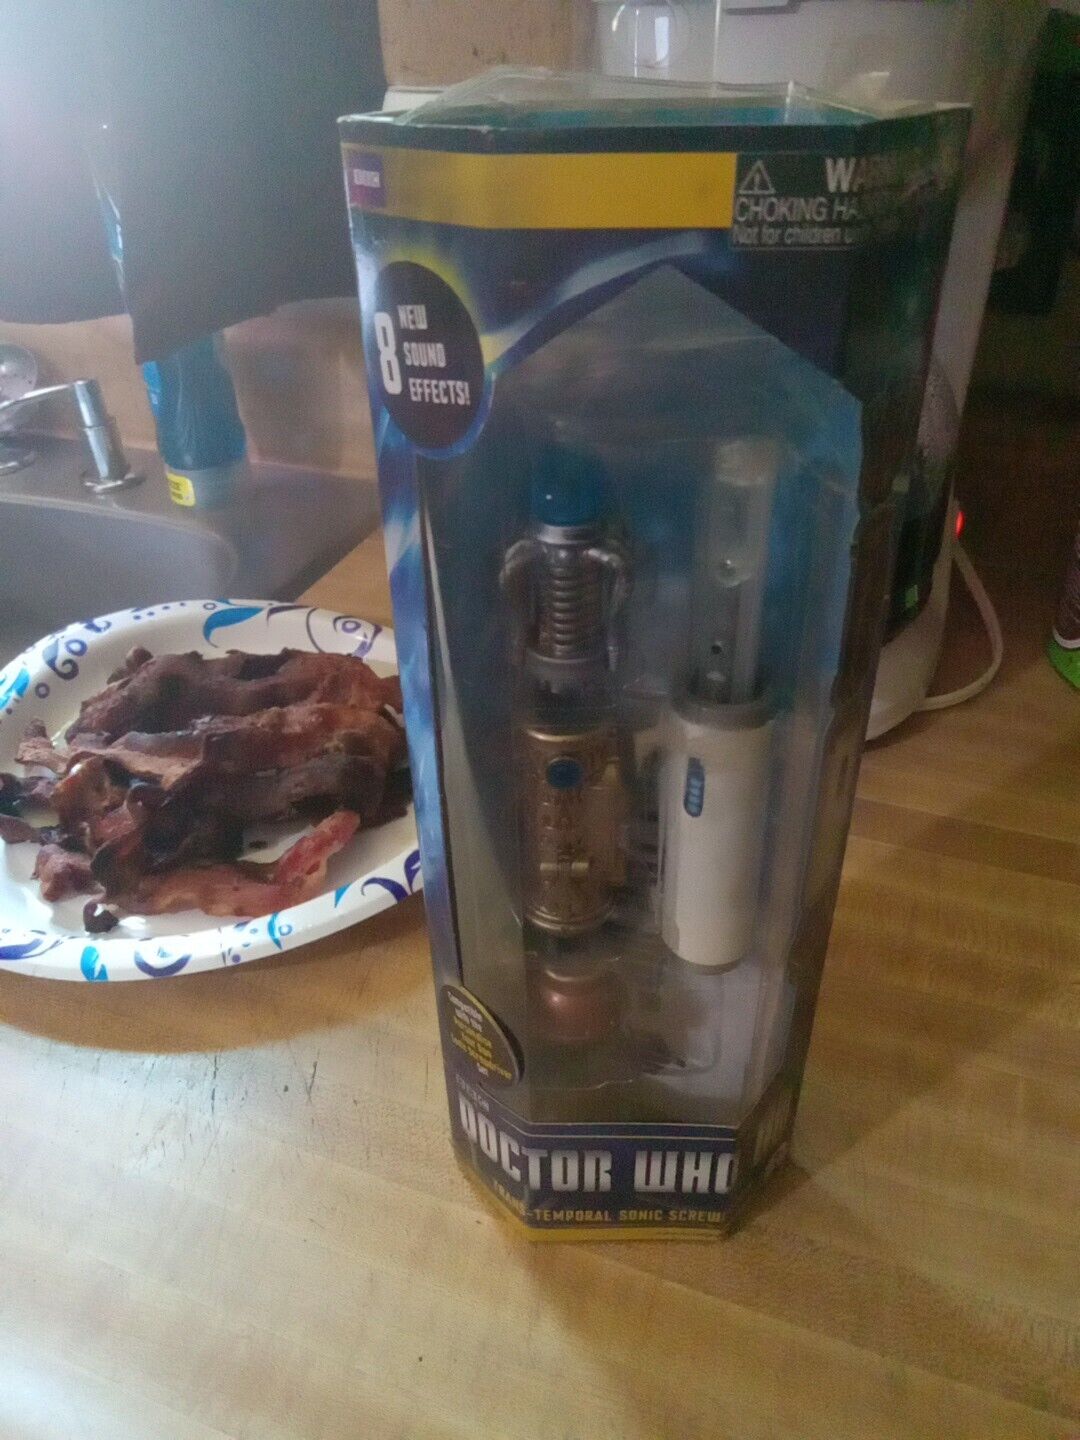 Doctor Who TRANS-TEMPORAL SONIC SCREWDRIVER -- Open Box?--FREE SHIPPING